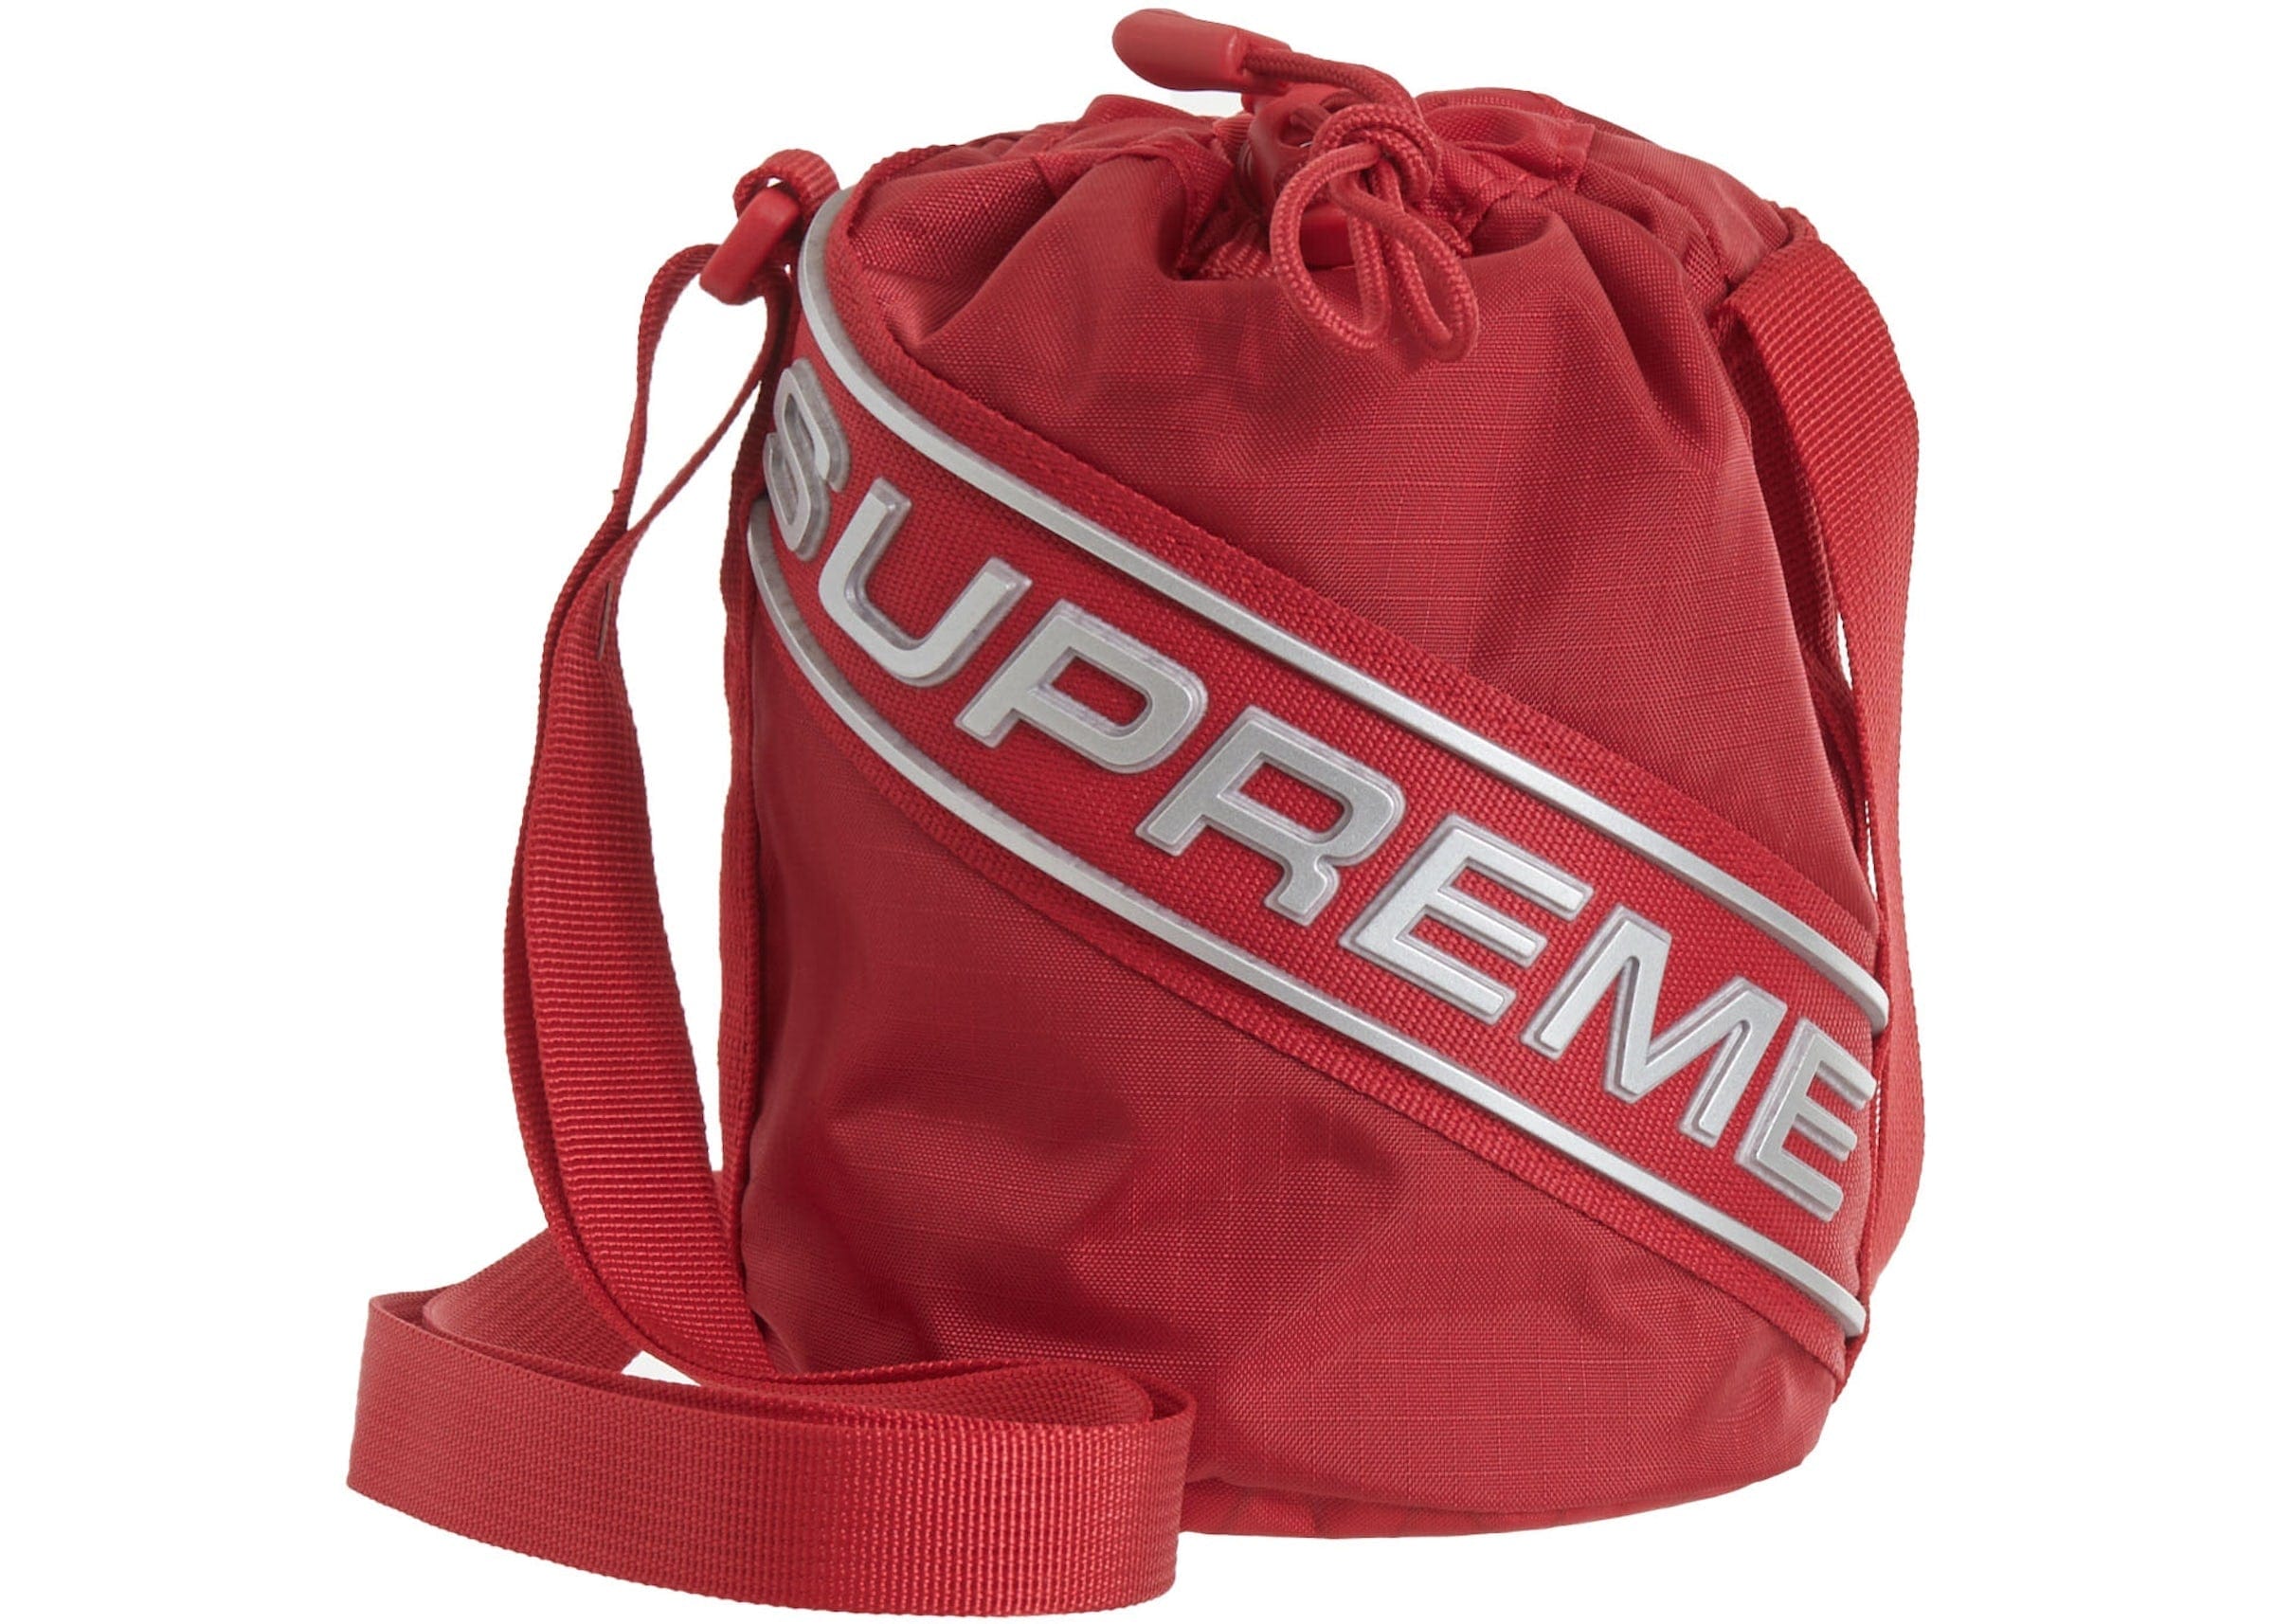 Supreme Small Cinch Pouch Red